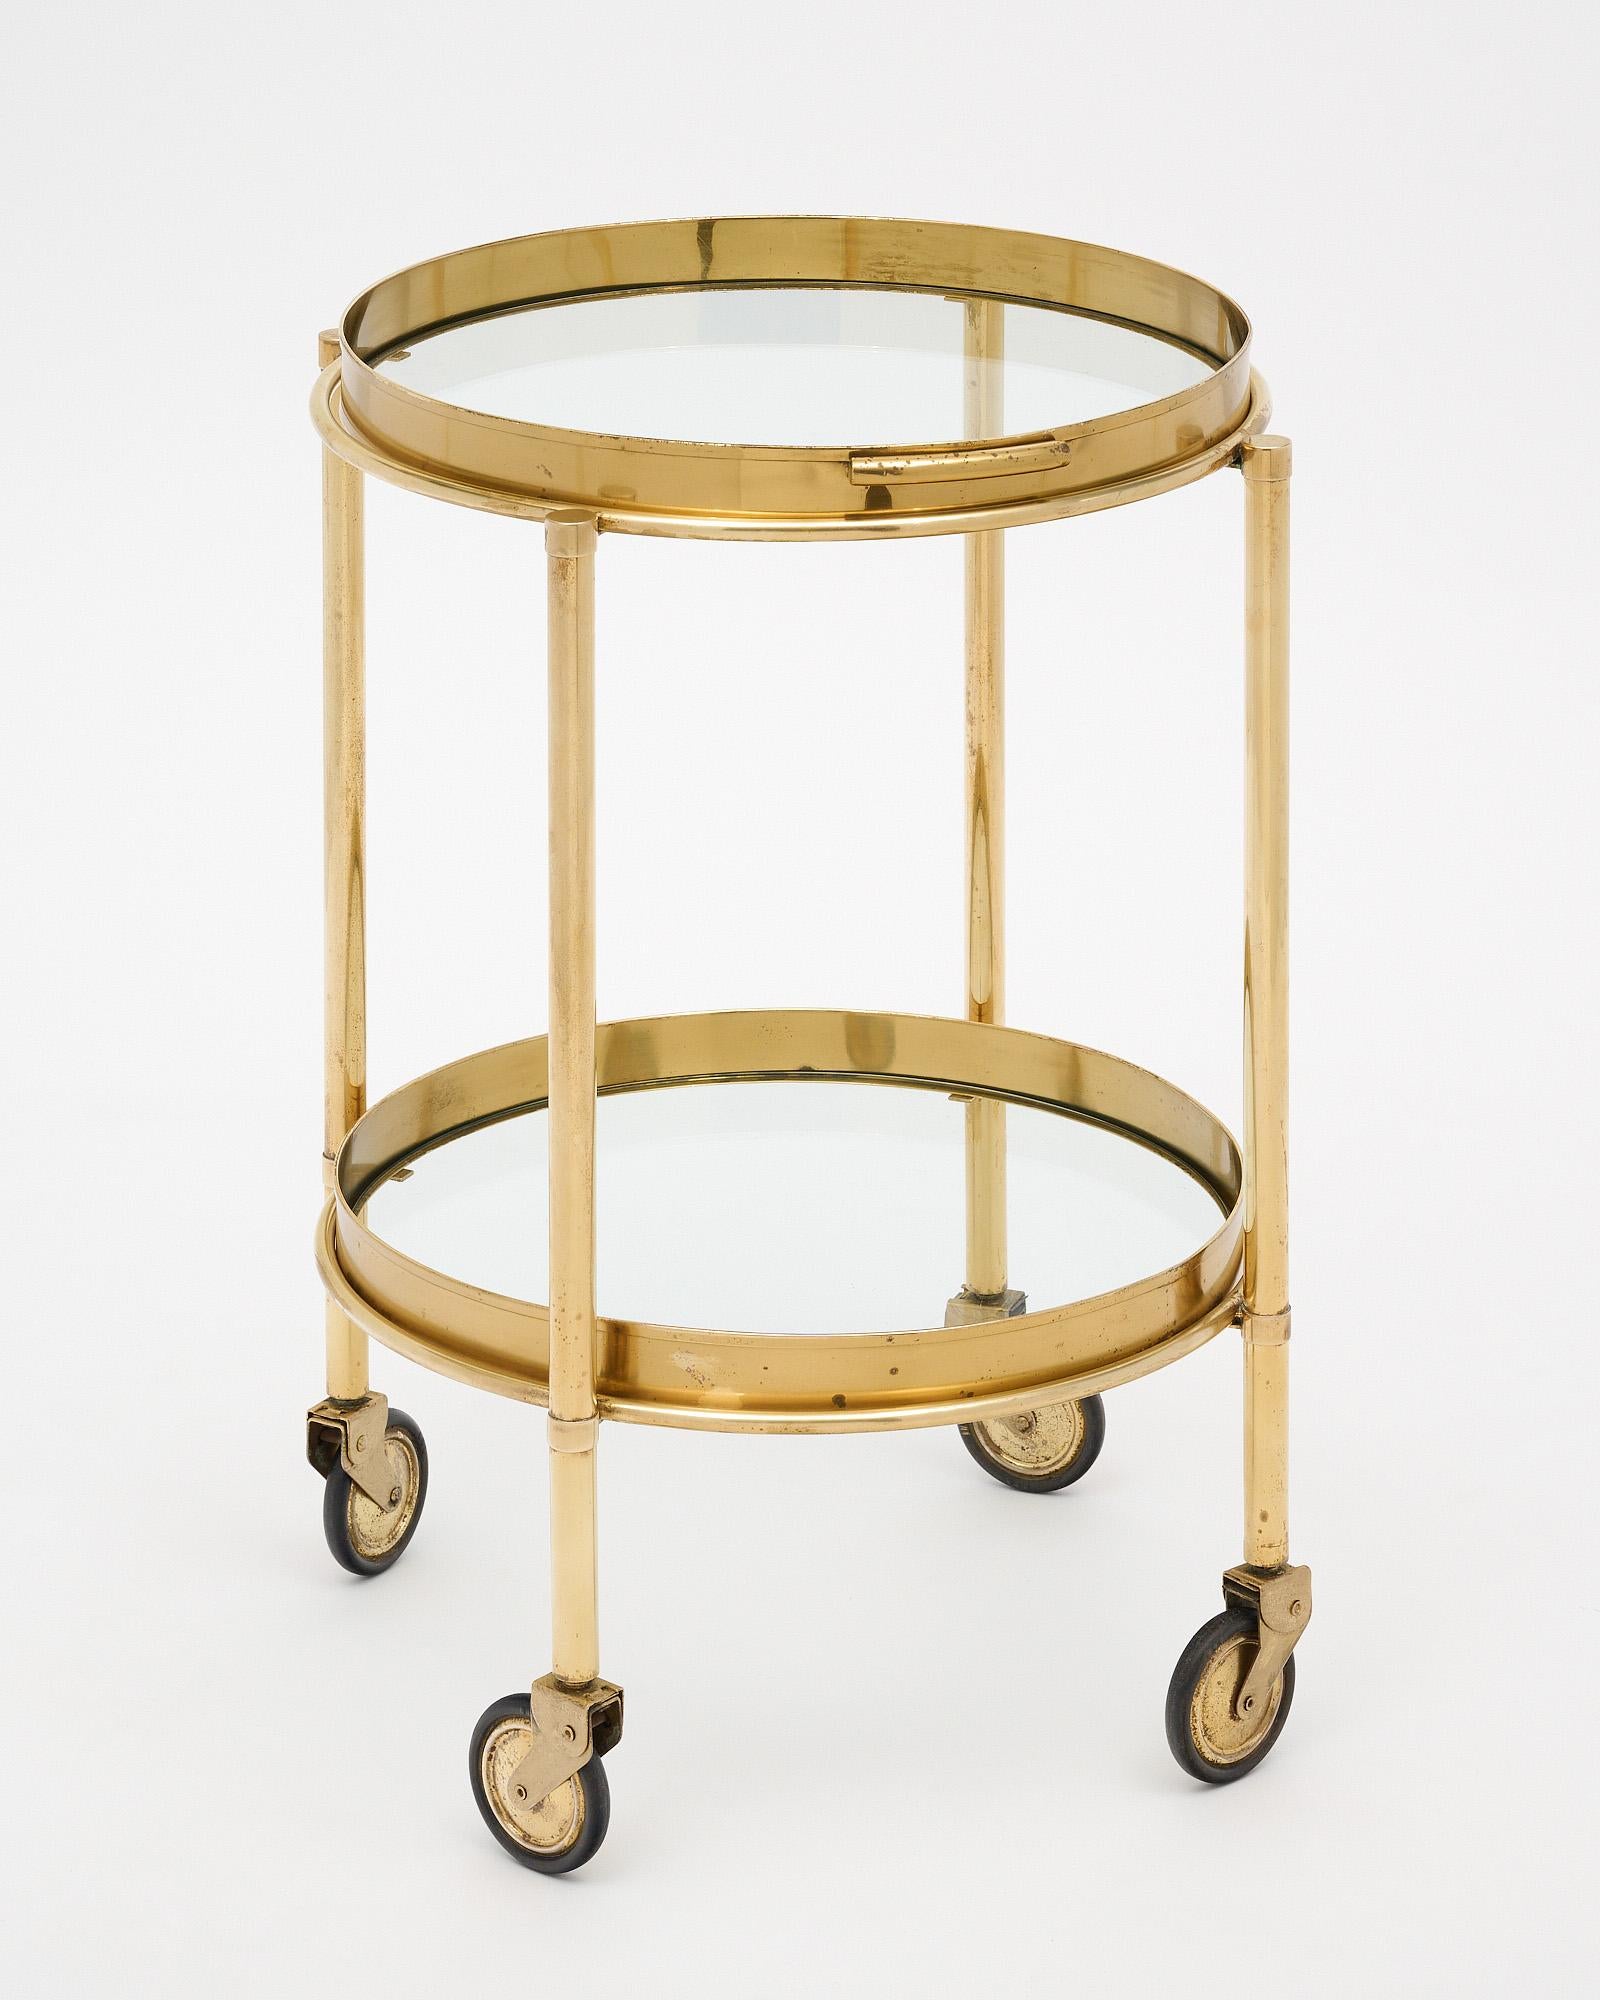 Bar cart from Italy in the Modernist style. This piece is made of brass with a circular frame and four supportive legs. The original casters are in working condition. There is a removable tray on top with glass bottom and a lower glass shelf for